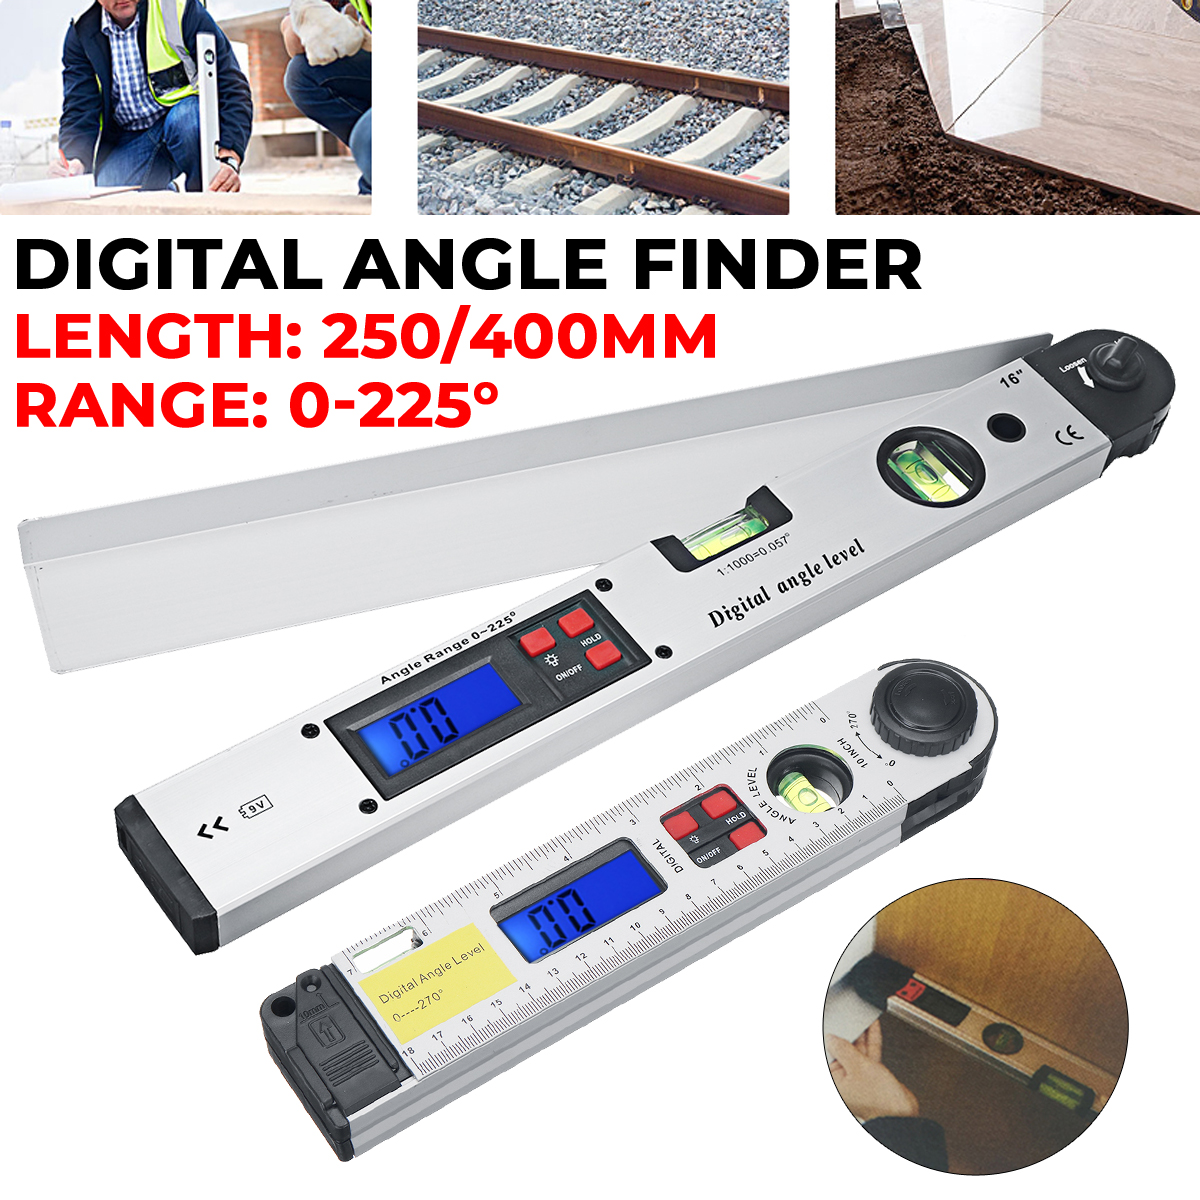 250400mm-Digital-Angle-Level-Meter-LCD-Display-0-225-Degree-for-Measuring-Roof-Angles-Fitting-Up-Win-1740234-2